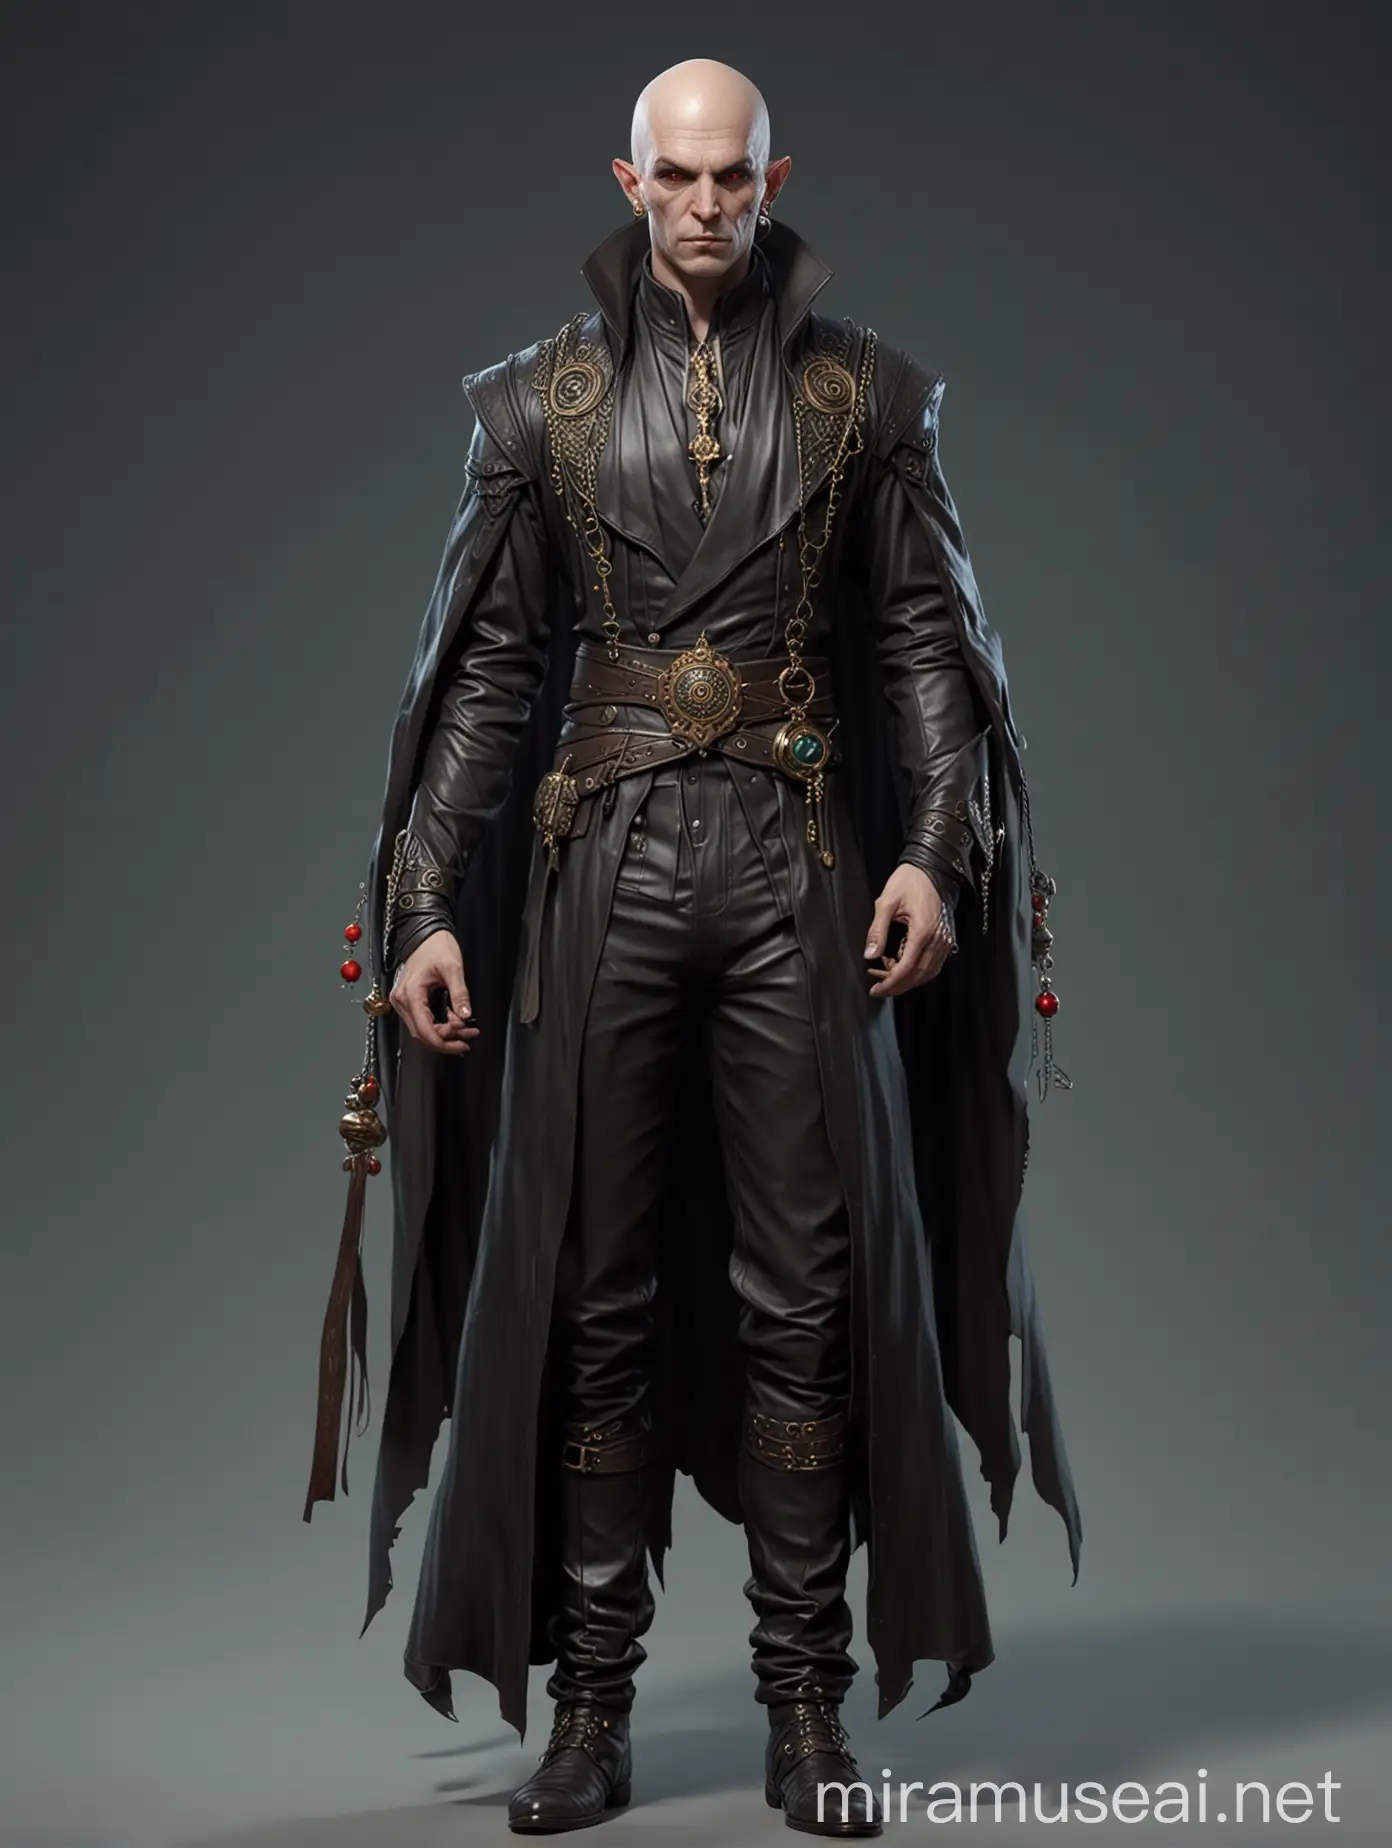 Male Evil Warlock in Ornate Robes and Leather Pants Fantasy Character Design